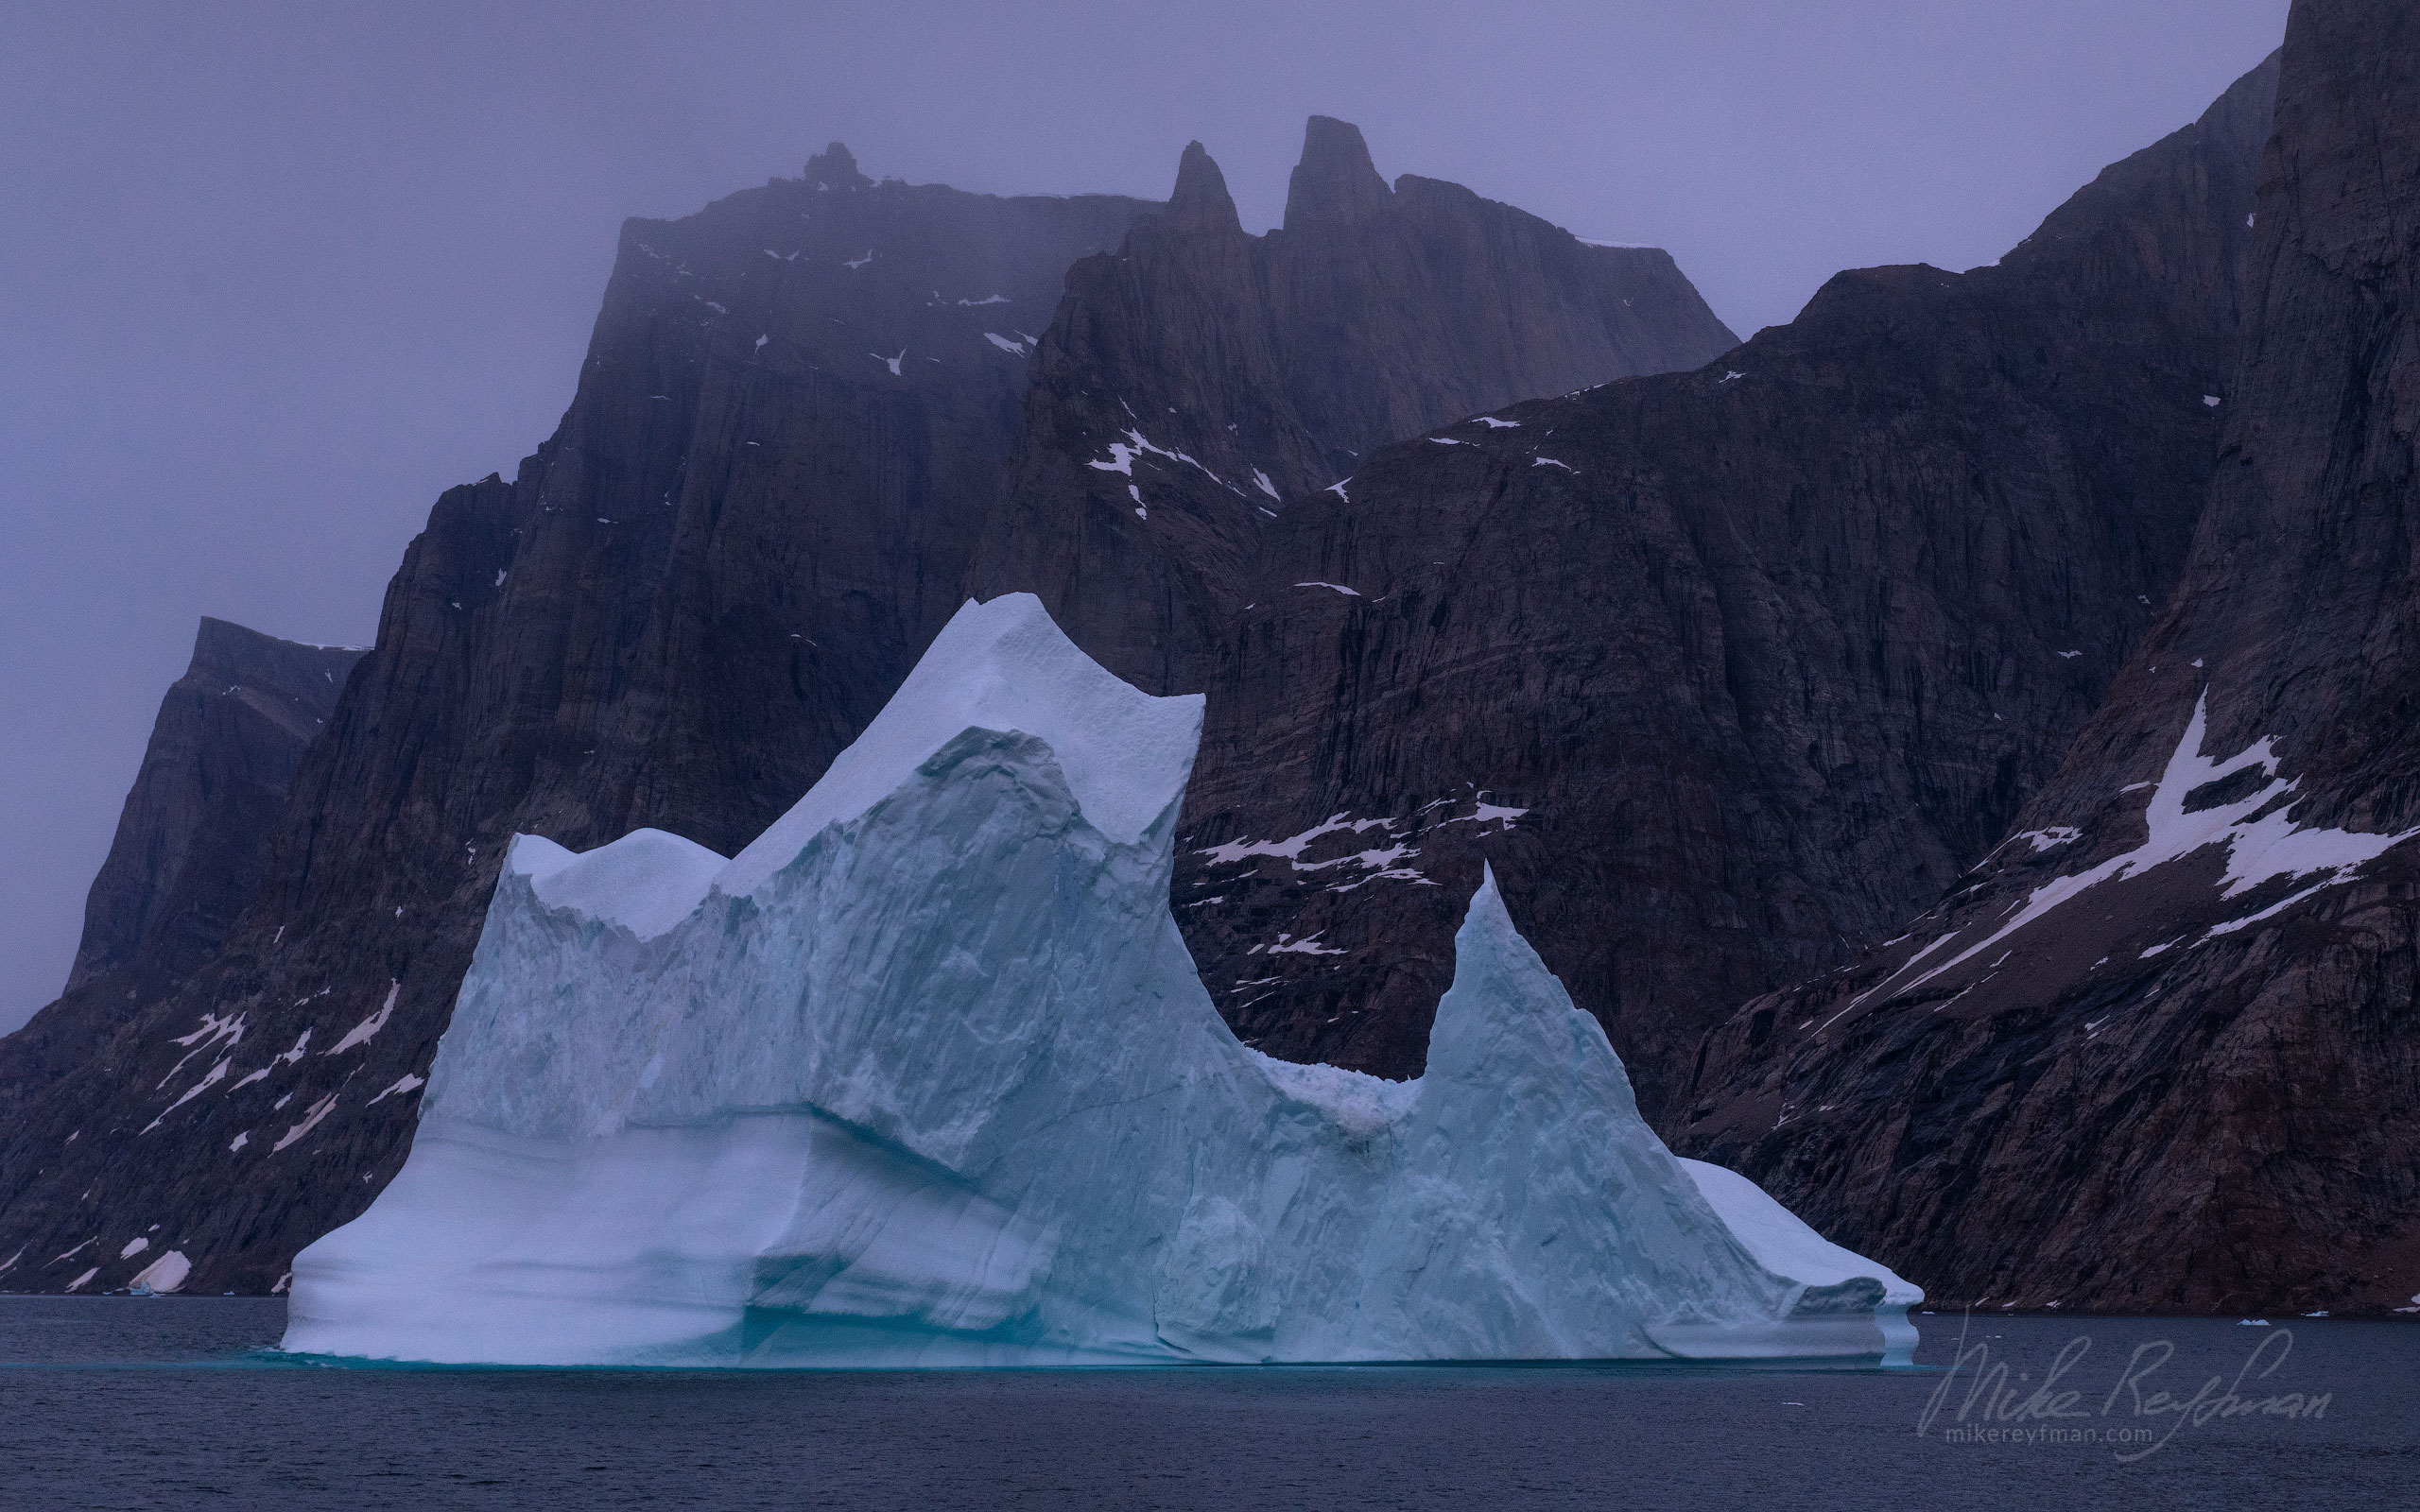 Iceberg in Scoresby Sund. Greenland. 025-GR-SC_50B8070 - The Scoresby Sund fjord system and the settlement of Ittoqqortoormiit. East Greenland. - Mike Reyfman Photography